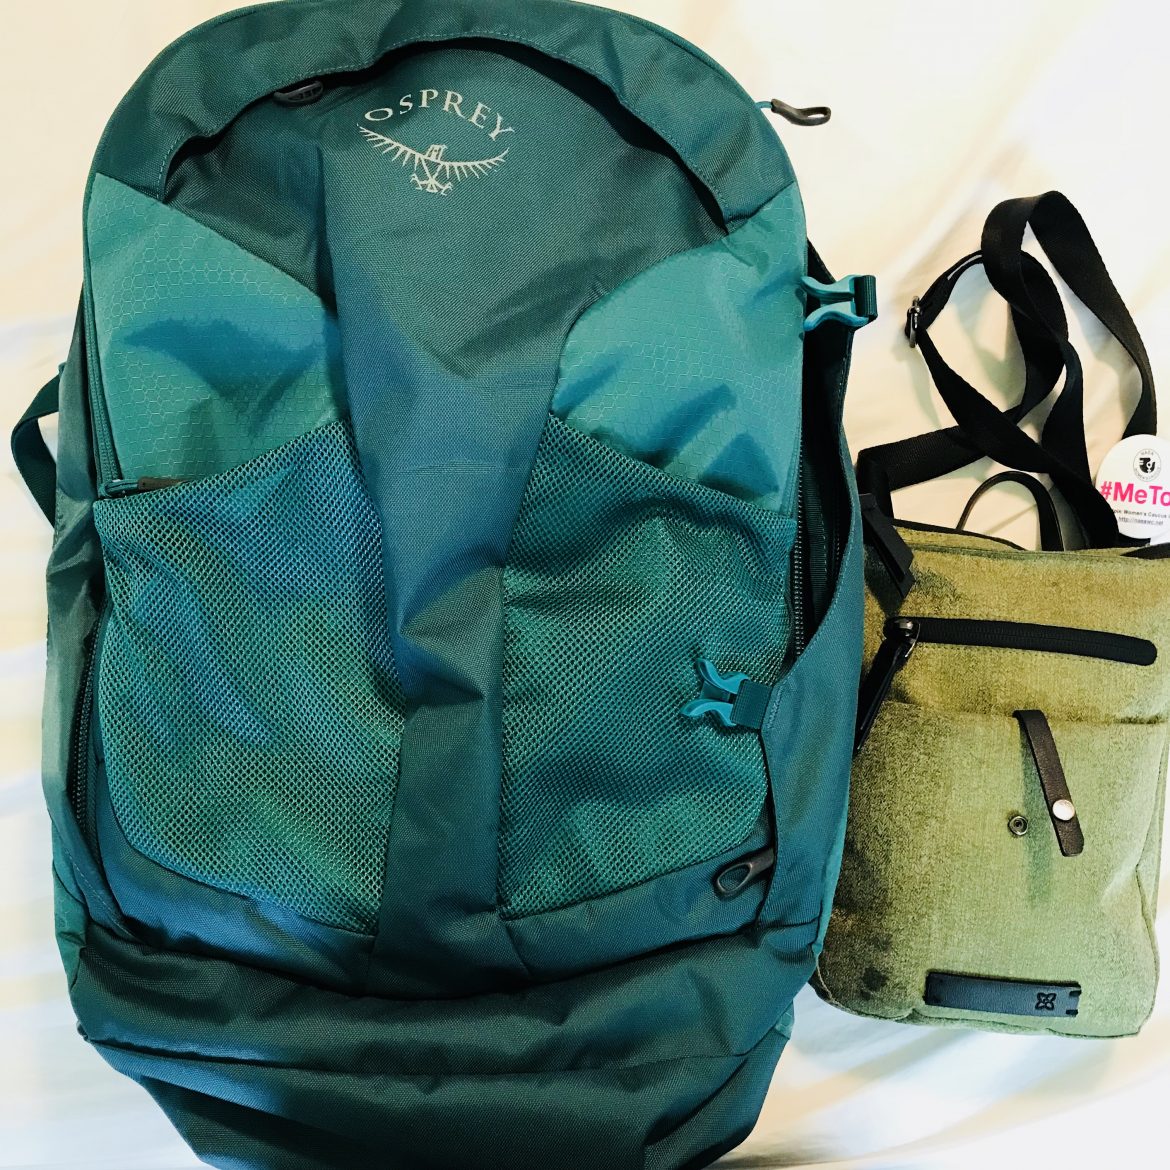 One Bag Packing List for Her: Pack Light in Only a Carry On Backpack